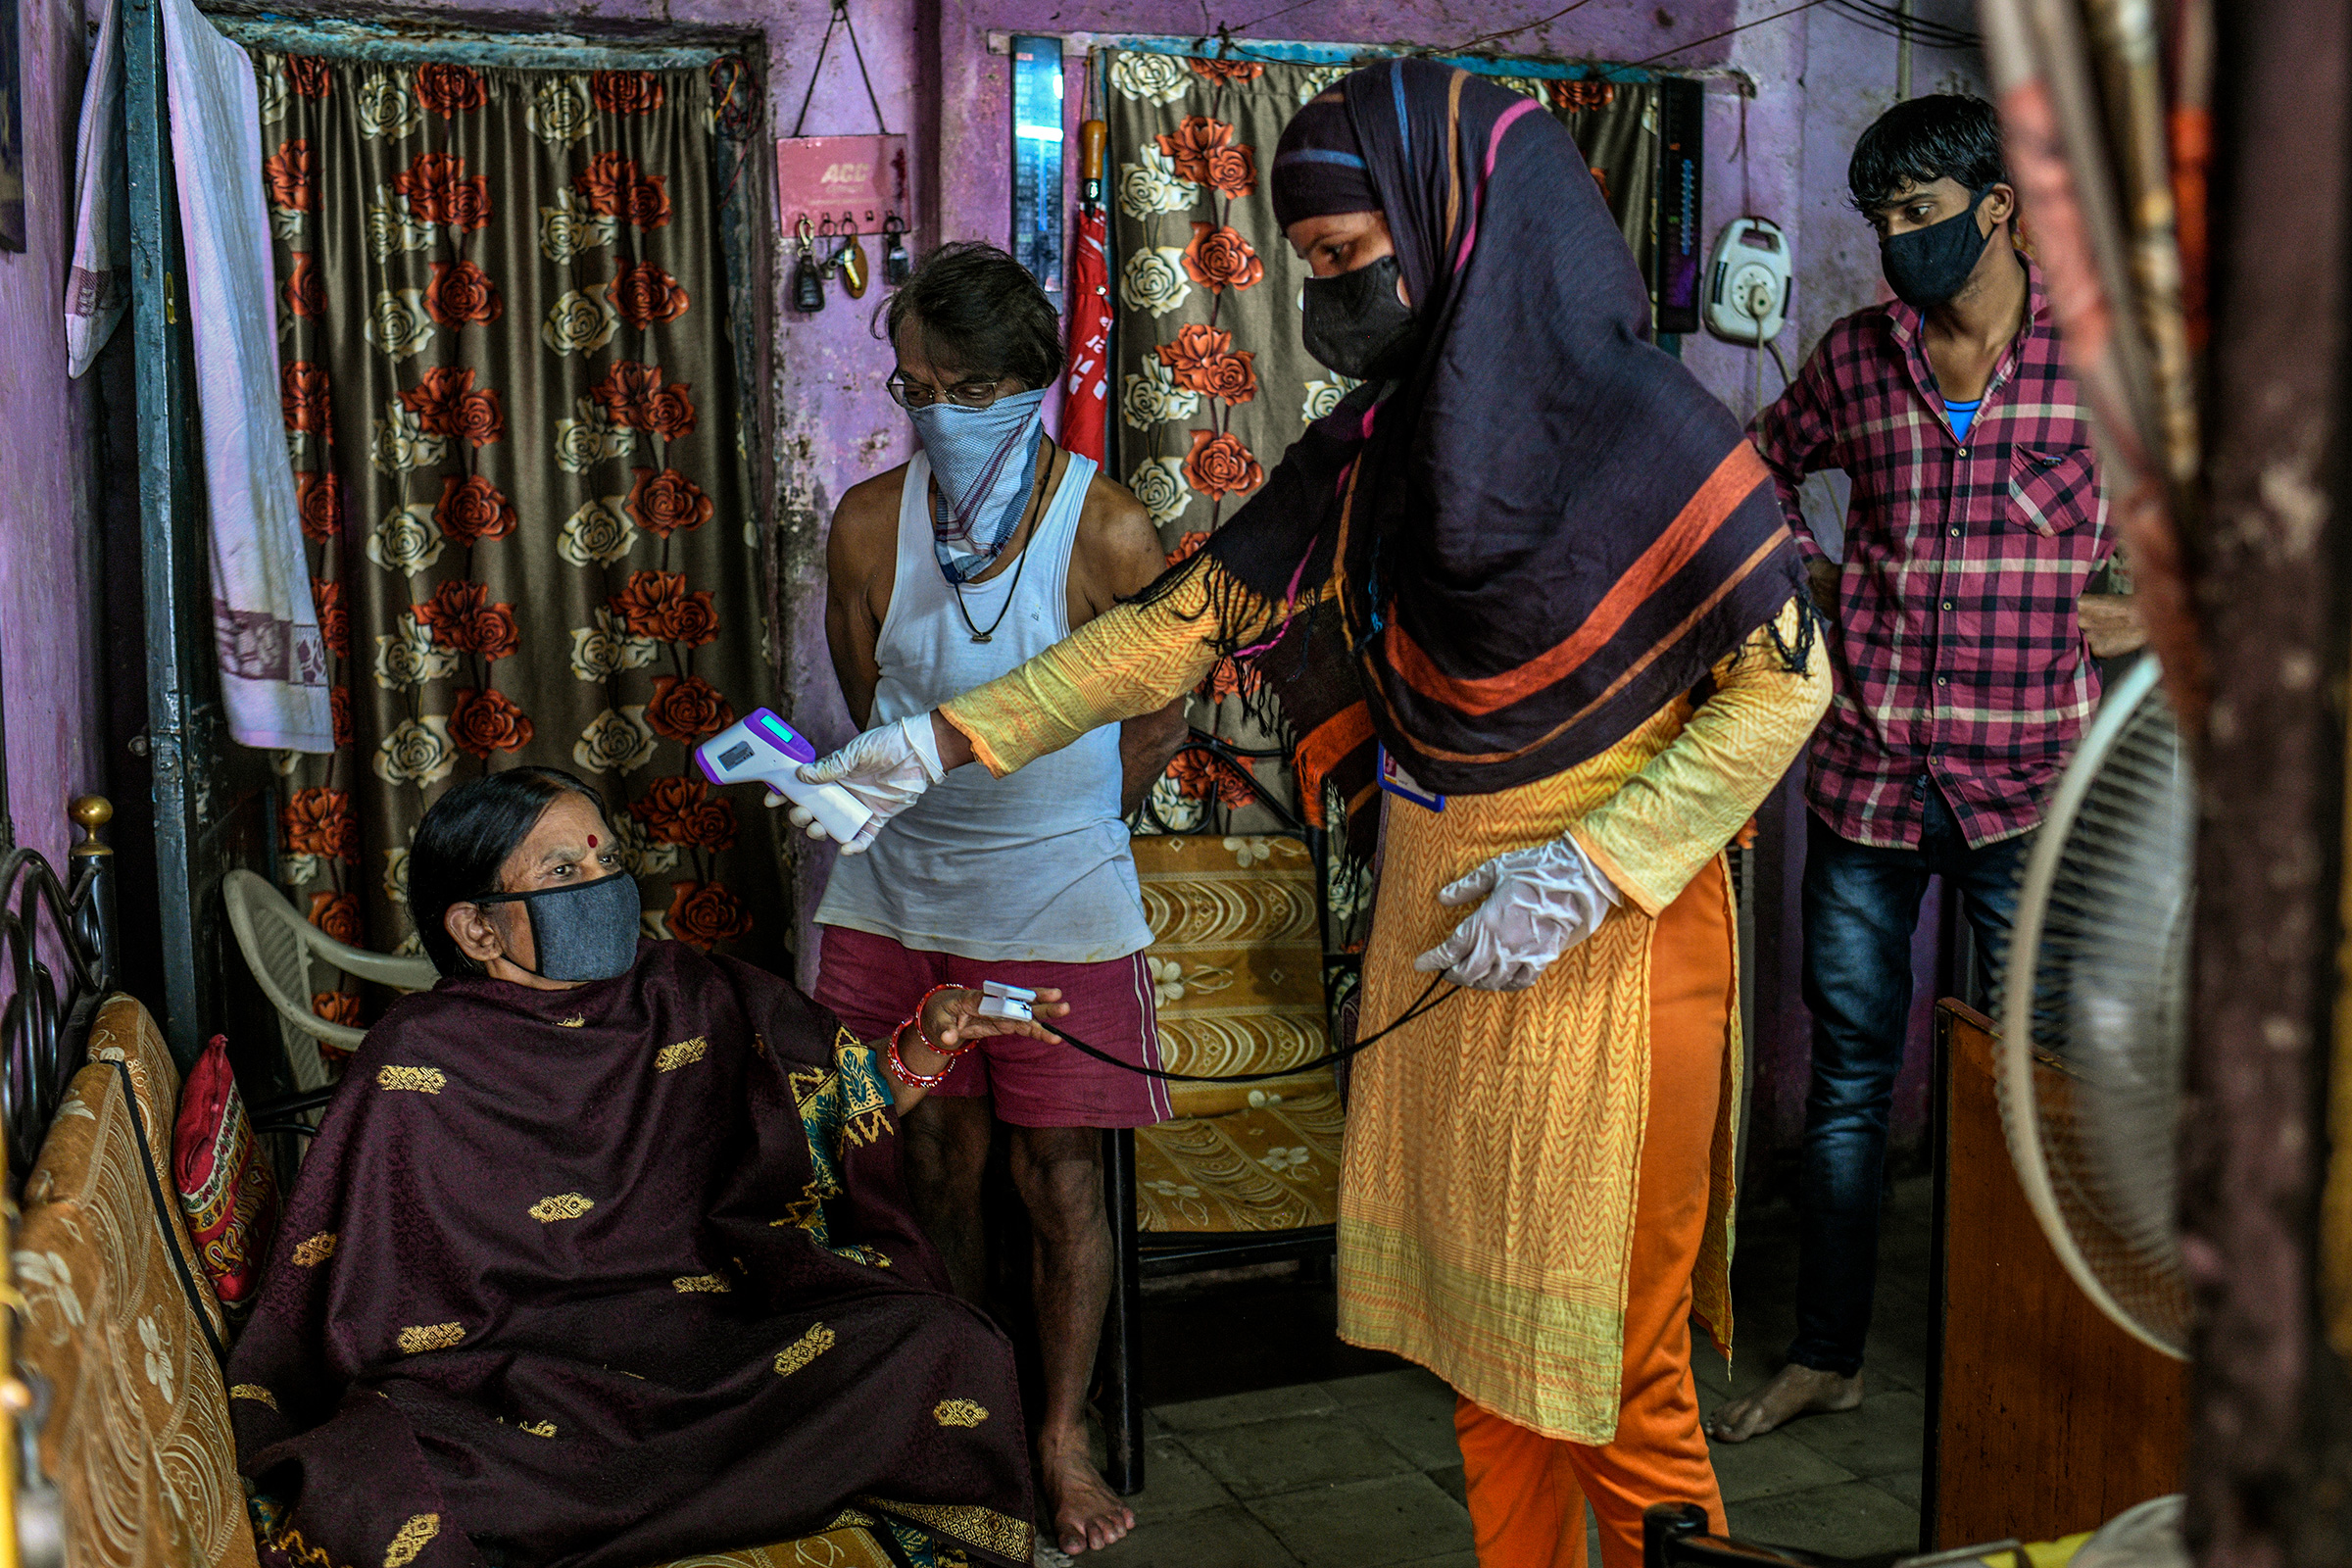 A health care worker checks a woman's temperature and oxygen saturation in the Dhole Patil slum on Aug. 10. (Atul Loke for TIME)